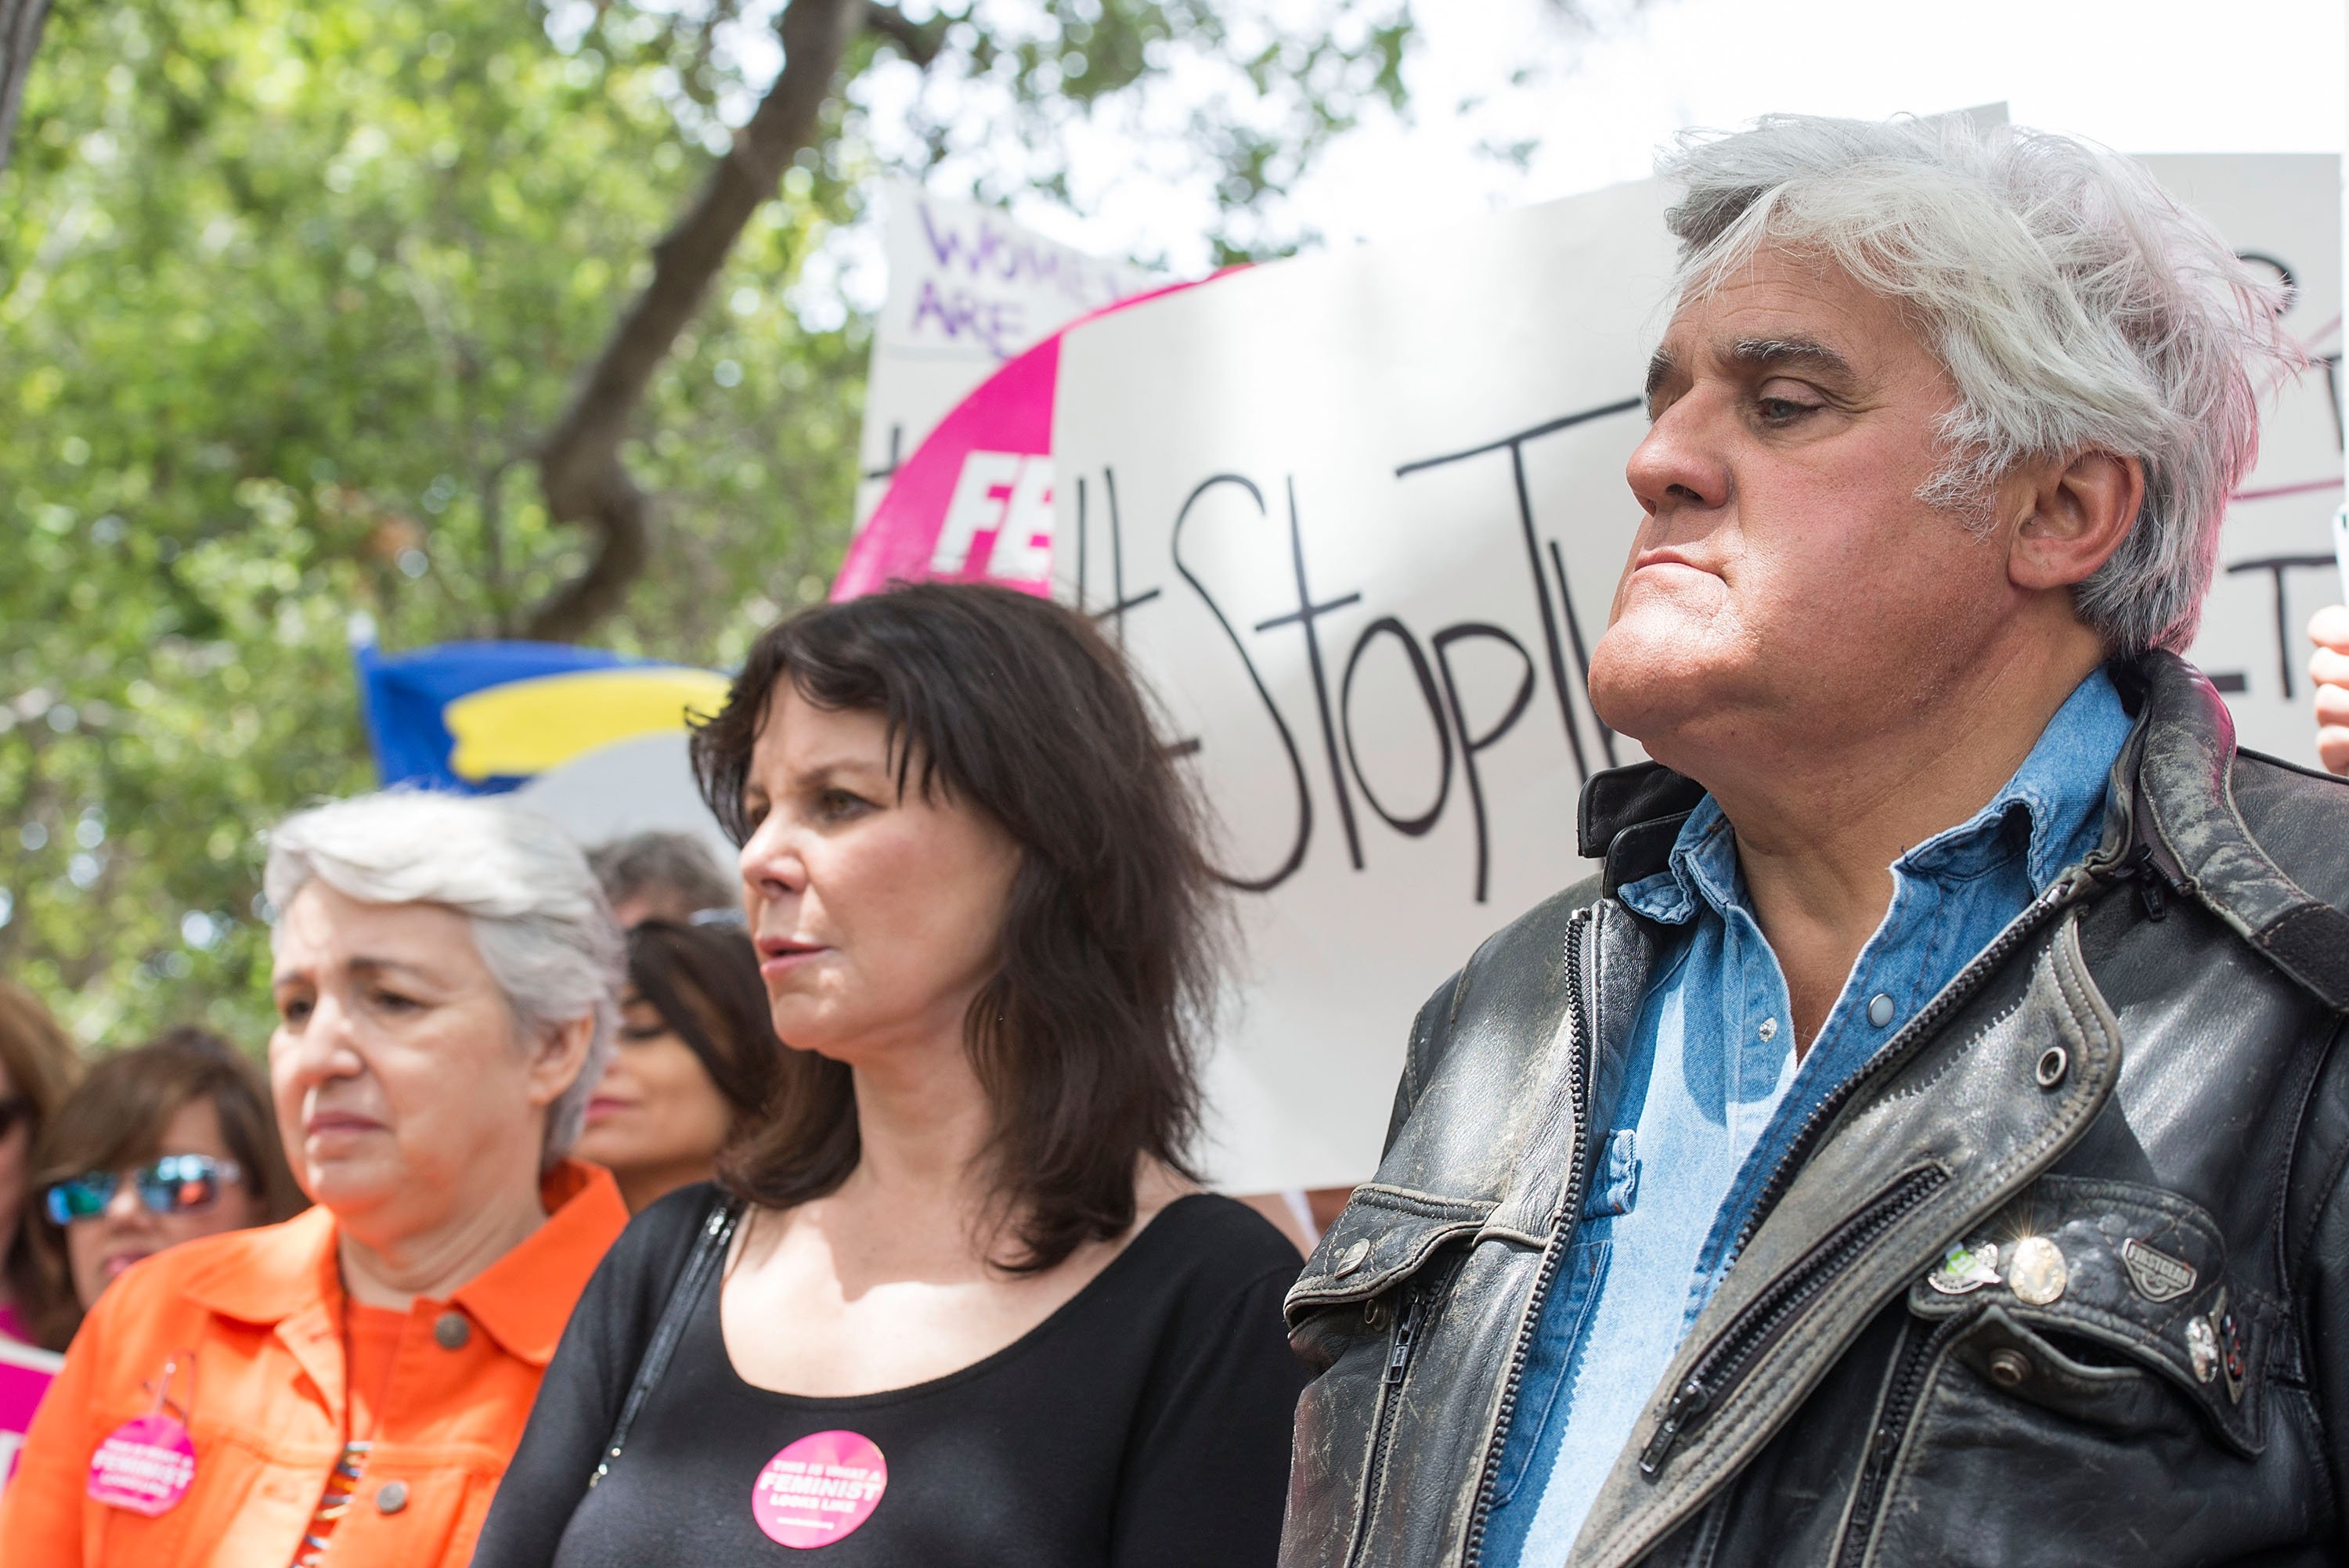 Mavis Leno and her husband Jay Leno attend the Coalition of Women's Rights, LGBT and Human Rights Groups Rally on May 5, 2014, in Beverly Hills, California. | Source: Getty Images